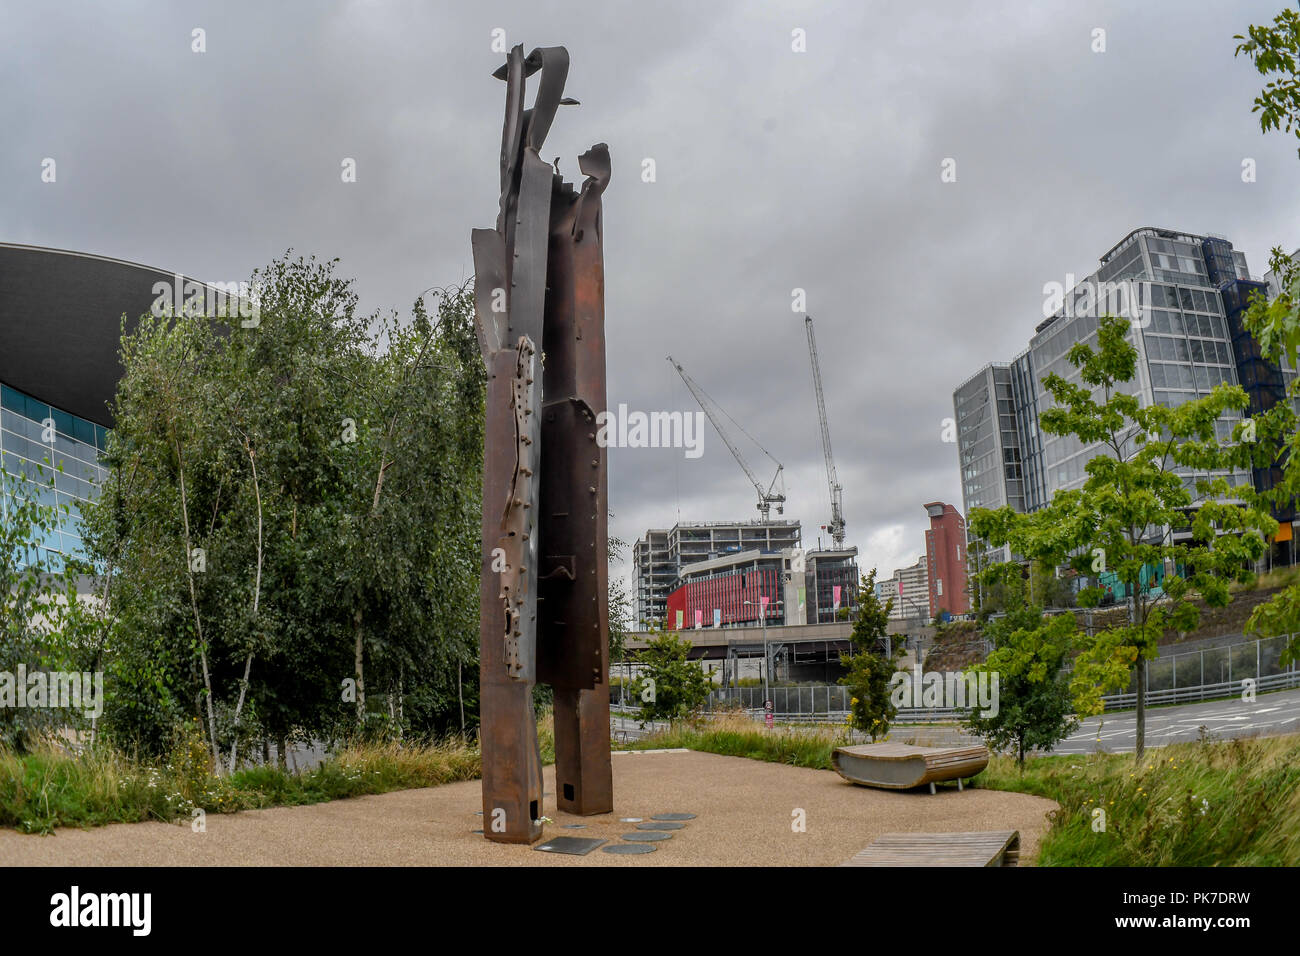 911 steel beam structure In The Olympic Park, London, UK. 11th September 2018. The 911 steel beam structure a Memorial In The Olympic Park. A memories of September 11, 2001 attack of 3,000 death. The world never is the same again 17 years later from Al Qaeda ’s to Taliban, IS, Daesh to ISIS? or regimes change? logic seven largely Muslim countries (Afghanistan, Iraq, Libya, Pakistan, Somalia, Syria, and Yemen) none of them has any link to the 9/11 attacks? and destroyed 20 million Arabs/Muslim killed and over 65 millions refugees?. Who is our real enemy of mankind, an enemy of humanity? shouldn Stock Photo